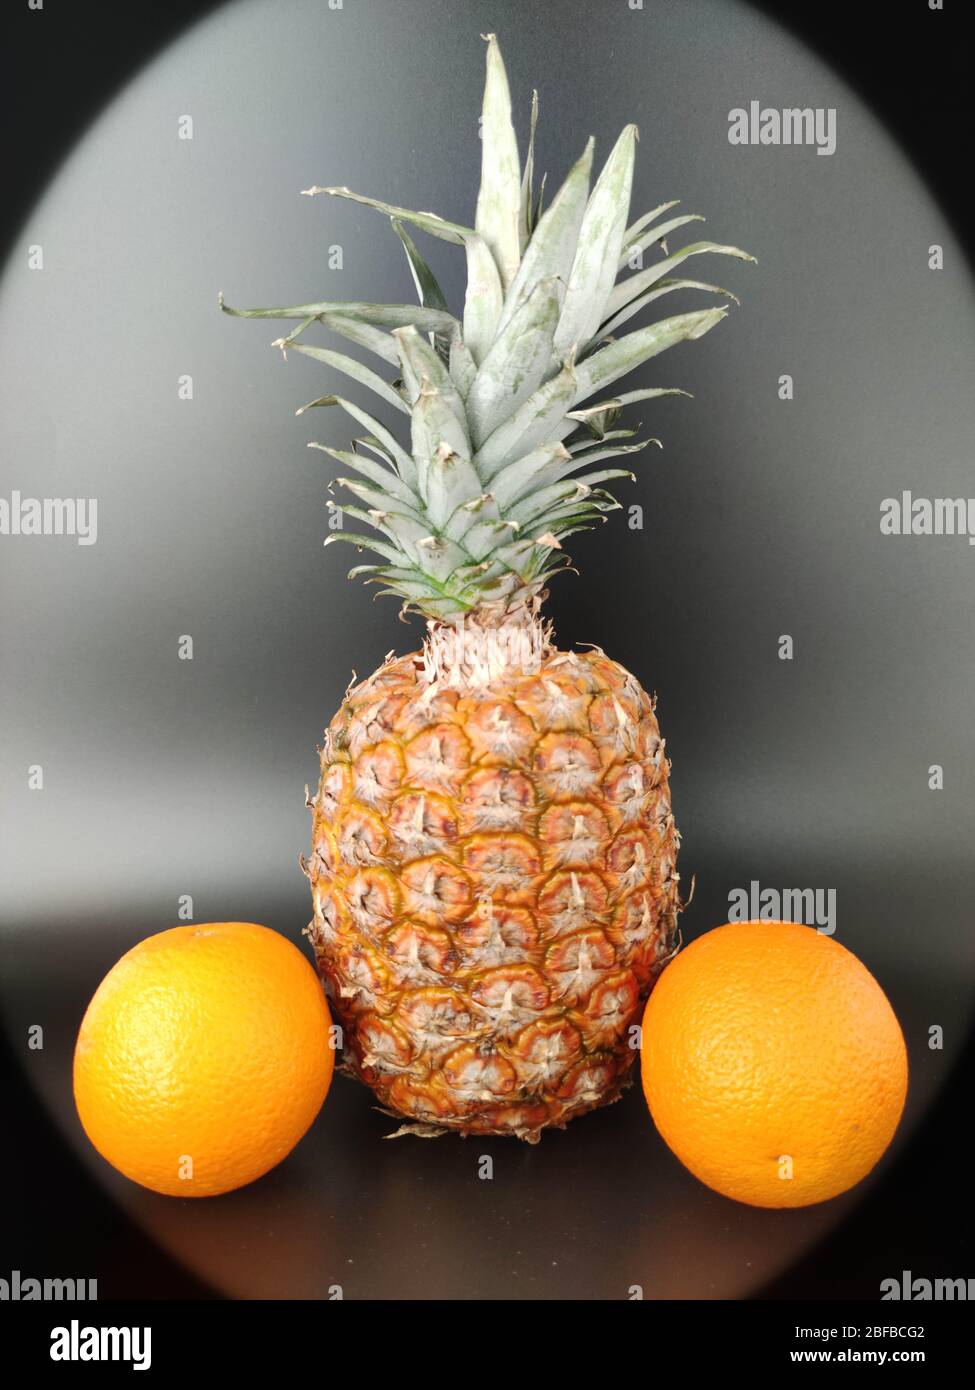 A whole pineapple on black. Vegetarian and healthy food. Nutrition and diet background Stock photo Stock Photo